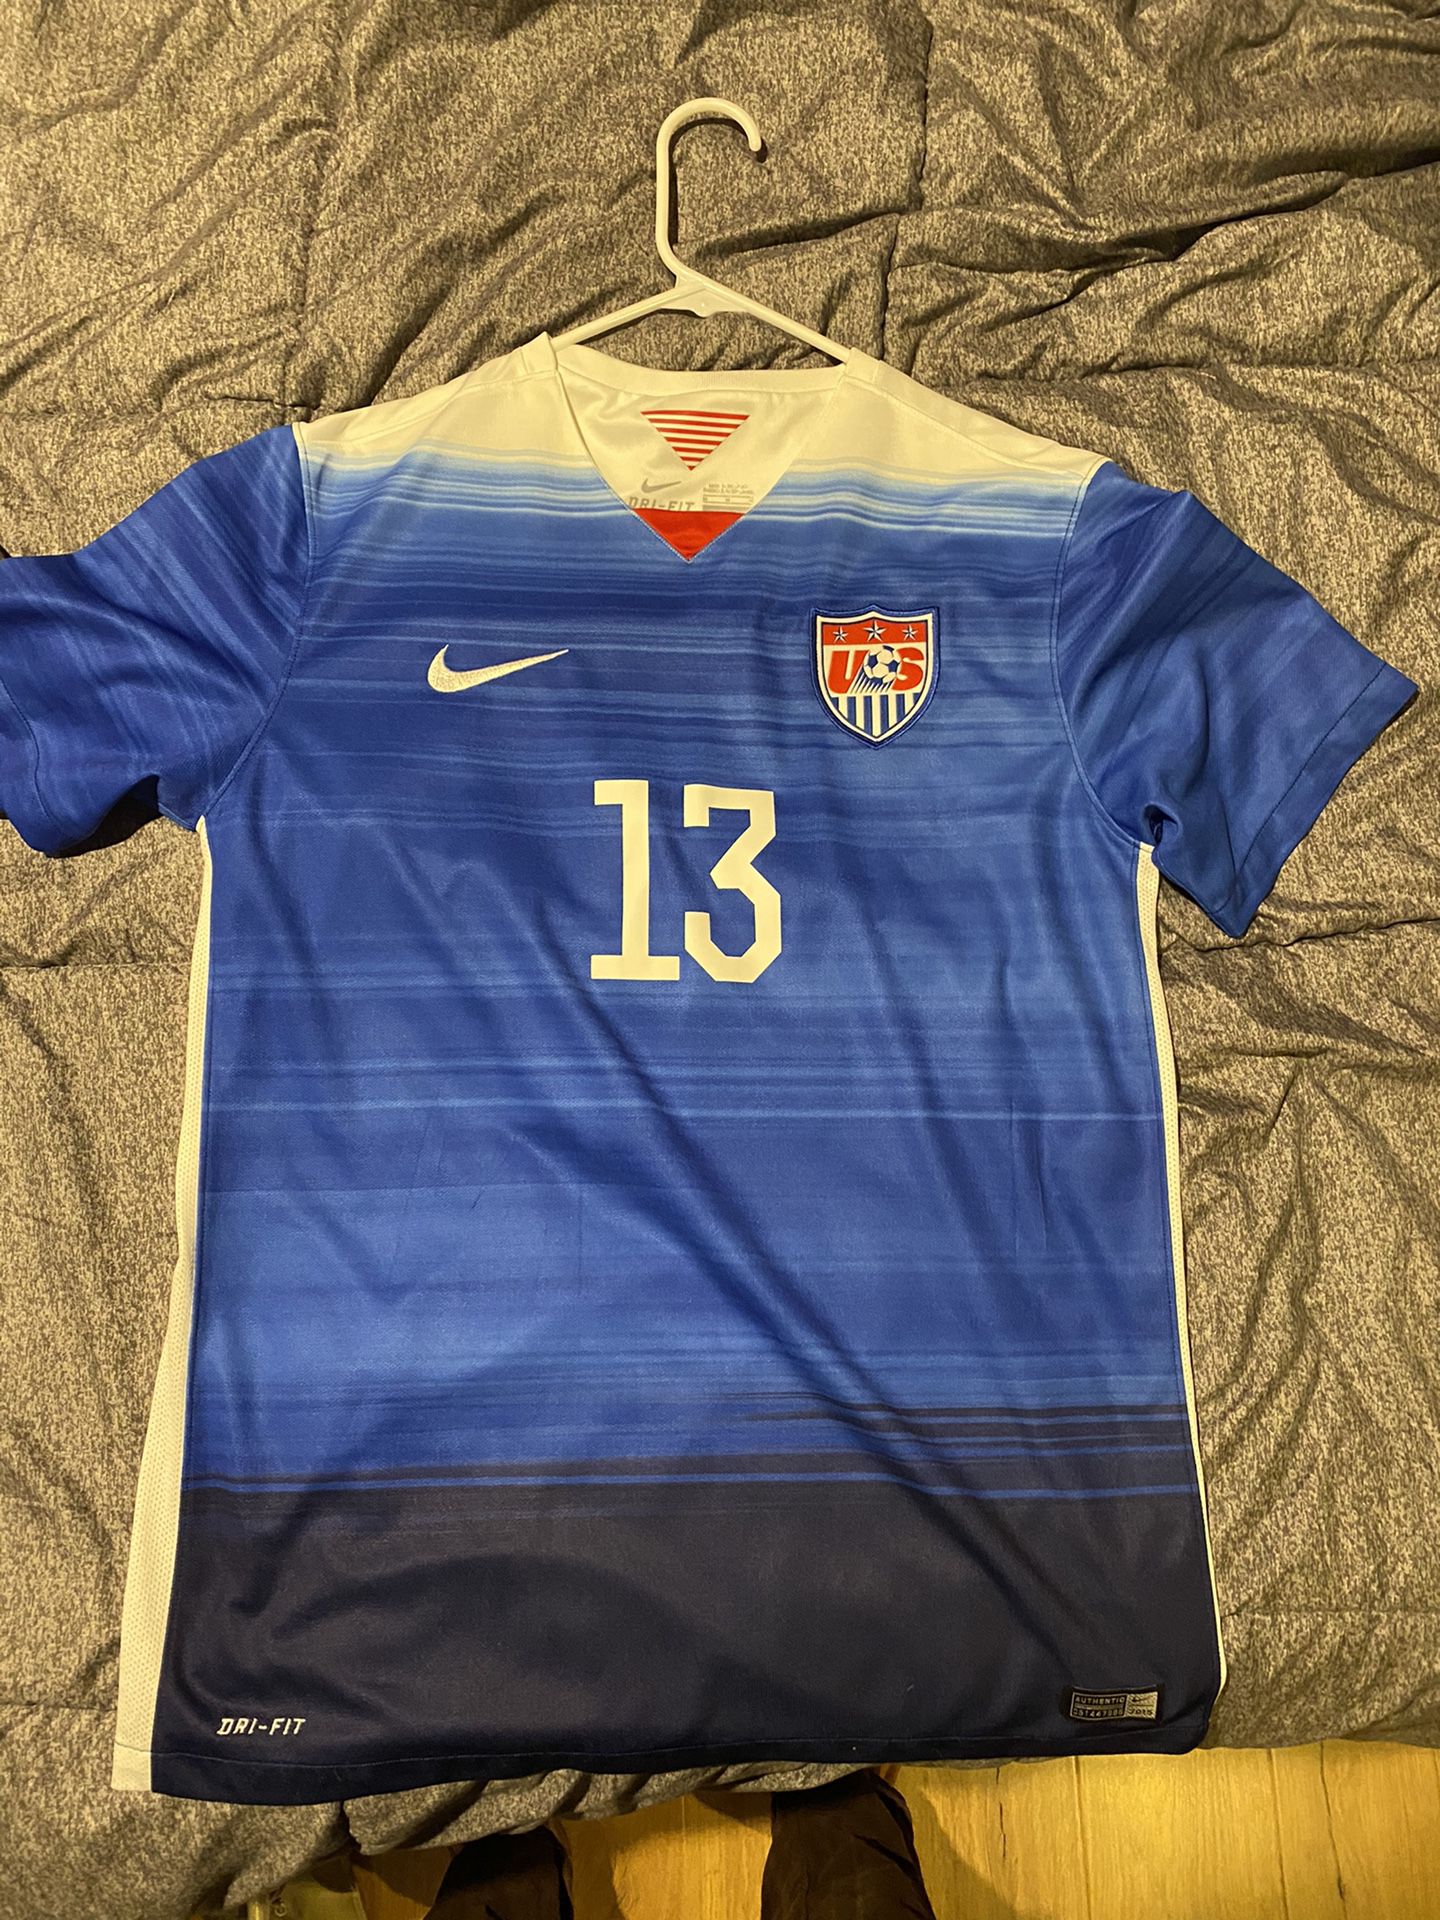 Women's US Soccer national team jersey for Sale in Los Angeles, CA - OfferUp